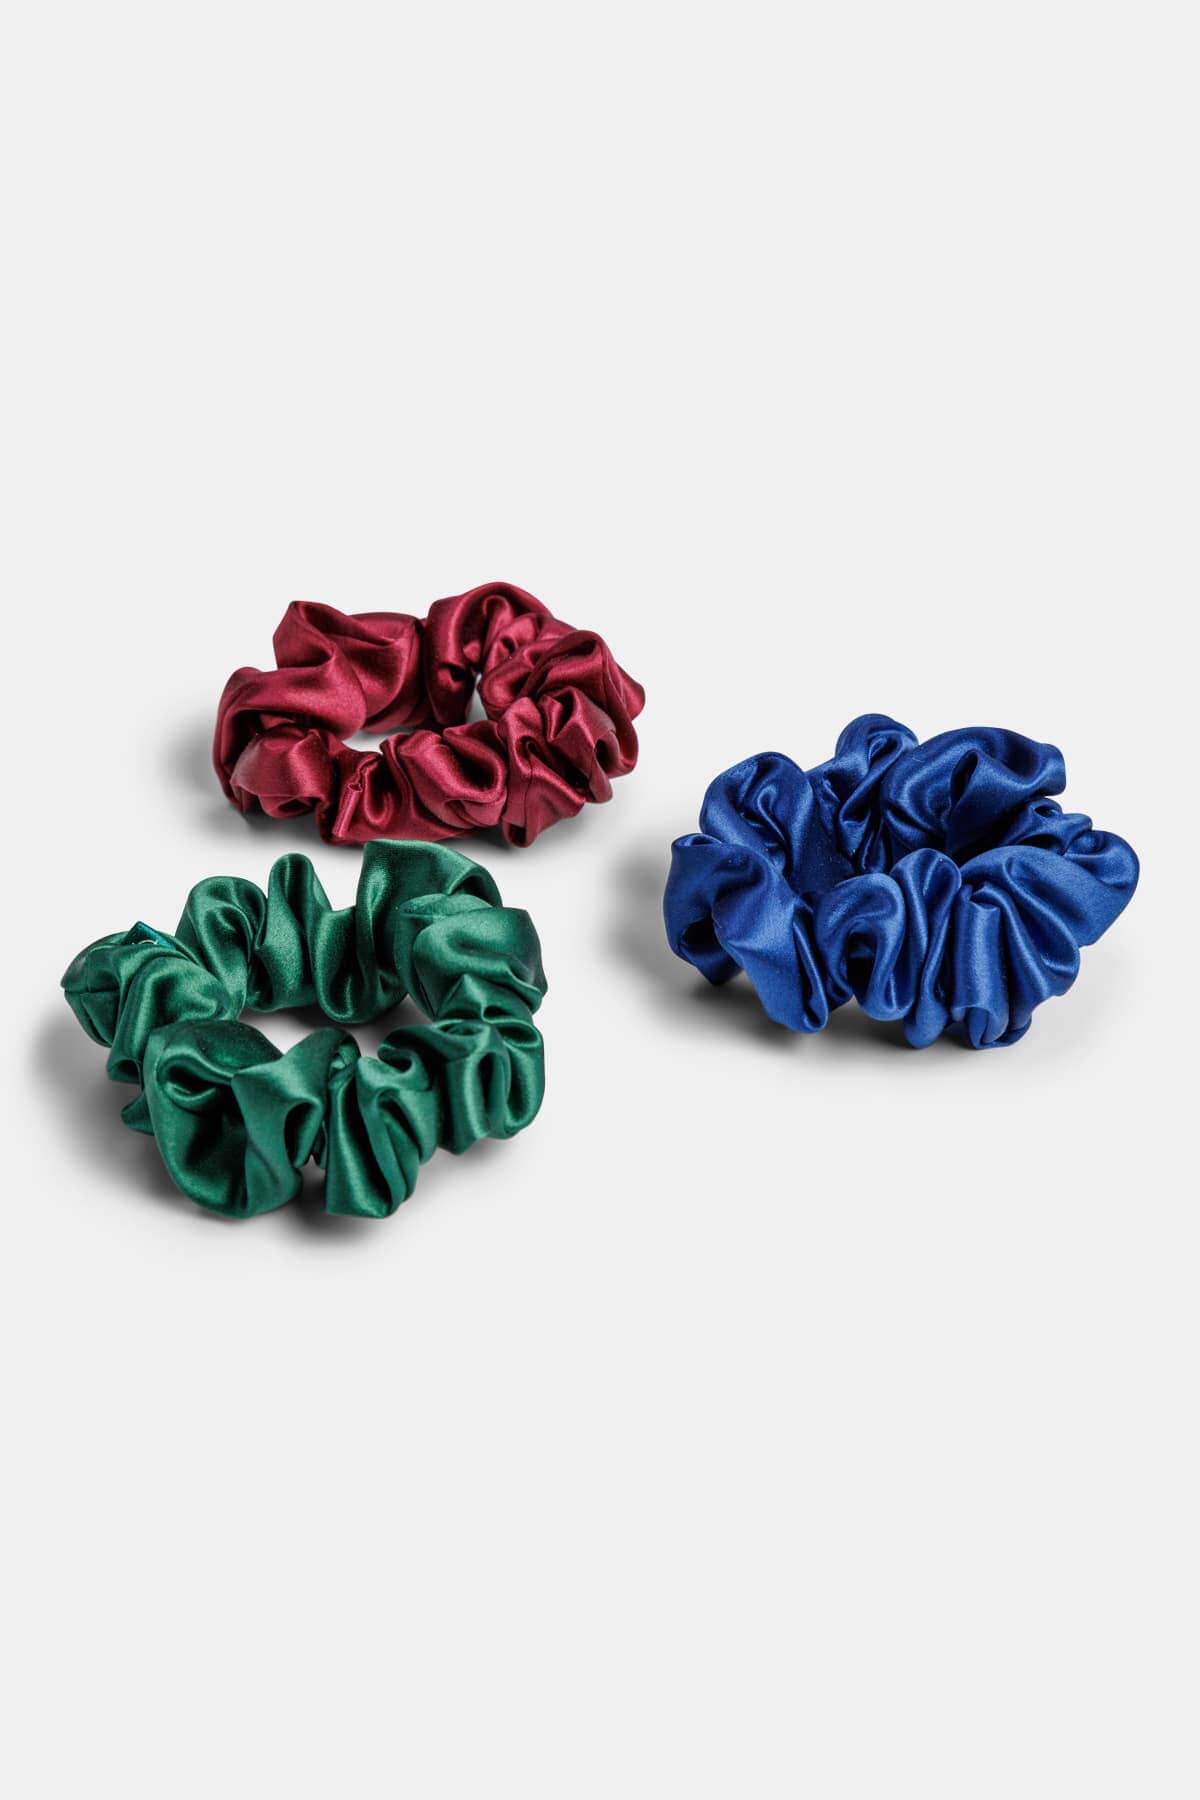 100% Pure Mulberry Silk Hair Scrunchies with Gift Box - Set of 3 Large Hair Ties Womens>Beauty>Hair Care Fishers Finery Navy-Hunter Green-Burgundy 